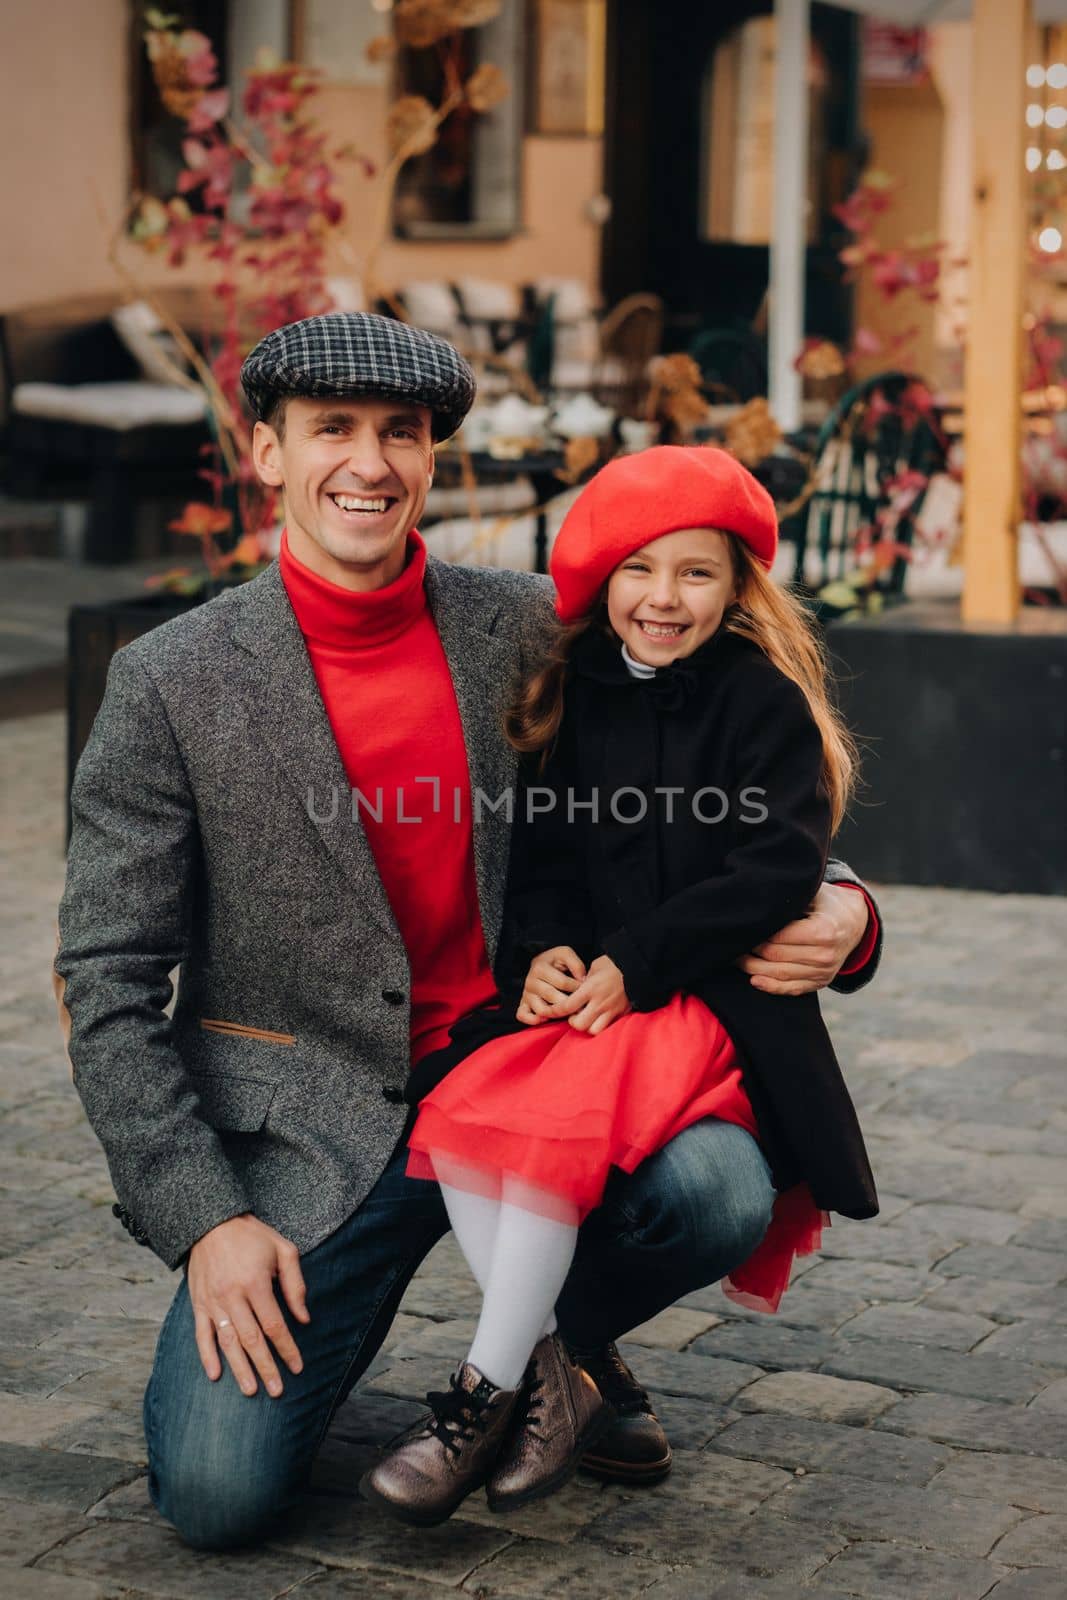 Portrait of a father and daughter sitting on a knee and being on a city street in autumn by Lobachad